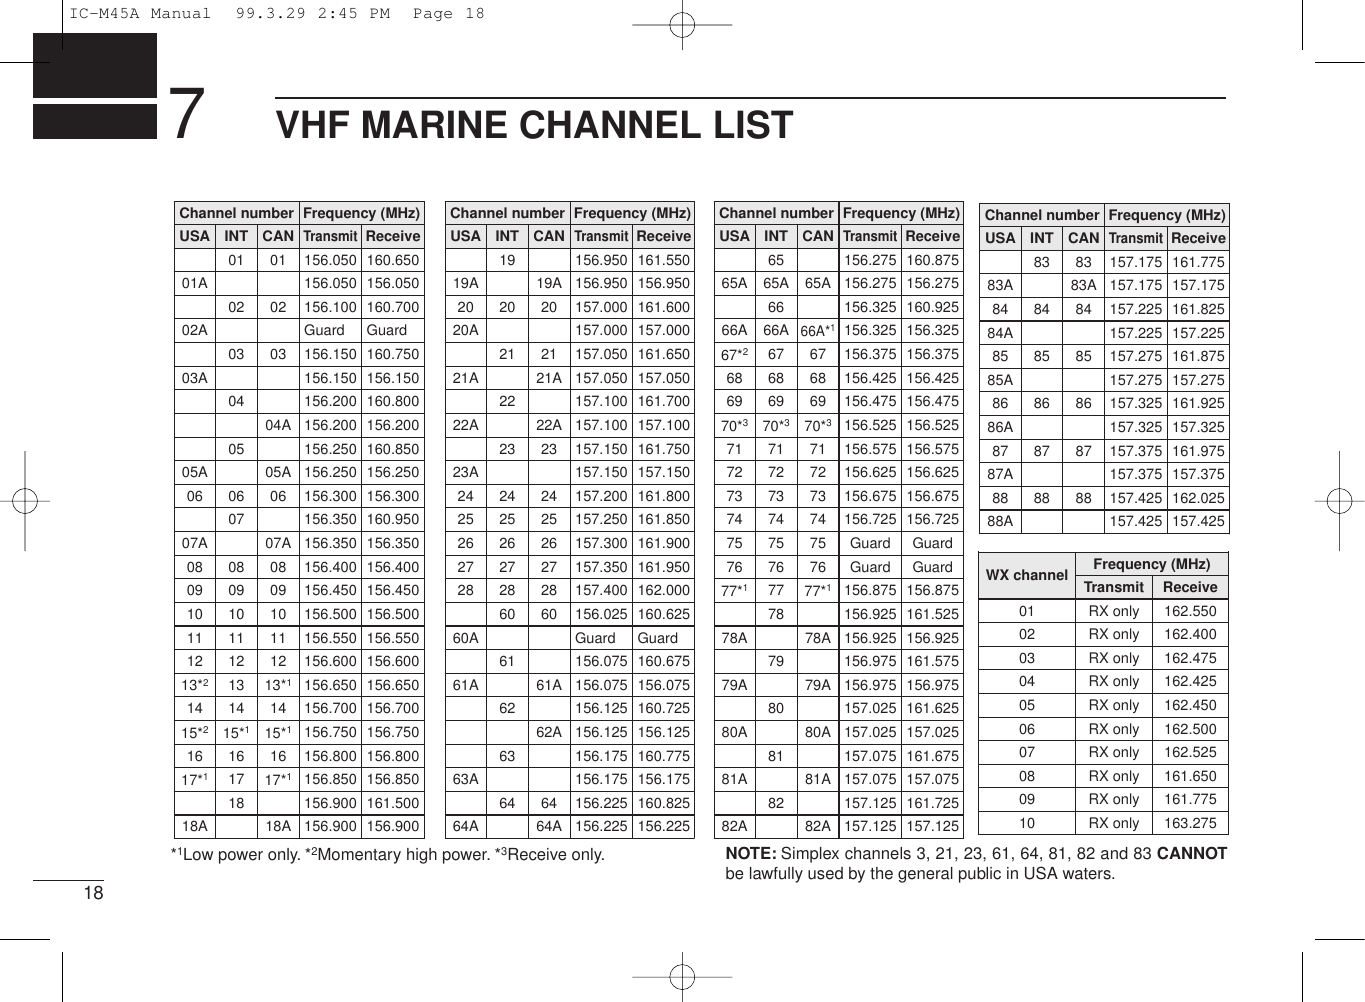 187VHF MARINE CHANNEL LISTChannel numberUSA CANTransmitReceive01 156.050 160.65001A 156.050 156.05002 156.100 160.70002A Guard Guard03 156.150 160.75003A 156.150 156.150156.200 160.80004A 156.200 156.200156.250 160.85005A 05A 156.250 156.25006 06 156.300 156.300156.350 160.95007A 07A 156.350 156.35008 08 156.400 156.40009 09 156.450 156.45010 10 156.500 156.50011 11 156.550 156.55012 12 156.600 156.60013*213*1156.650 156.65014 14 156.700 156.70015*215*1156.750 156.75016 16 156.800 156.80017*117*1156.850 156.850156.900 161.50018A 18A 156.900 156.900Frequency (MHz)INT010203040506070809101112131415*1161718Channel number Frequency (MHz)USA CANTransmitReceive156.950 161.55019A 19A 156.950 156.95020 20 157.000 161.60021 157.050 161.65021A 21A 157.050 157.050157.100 161.70022A 22A 157.100 157.10023 157.150 161.75023A 157.150 157.15024 24 157.200 161.80025 25 157.250 161.85026 26 157.300 161.90027 27 157.350 161.95028 28 157.400 162.00060 156.025 160.62560A Guard Guard156.075 160.67561A 61A 156.075 156.075156.125 160.72562A 156.125 156.125156.175 160.77563A 156.175 156.17564 156.225 160.82564A 64A 156.225 156.225INT19202122232425262728606162636420A 157.000 157.000Channel number66AFrequency (MHz)66A*1USA CANTransmitReceive156.275 160.87565A 65A 156.275 156.275156.325 160.92567*267 156.375 156.37568 68 156.425 156.42569 69 156.475 156.47570*370*3156.525 156.52571 71 156.575 156.57572 72 156.625 156.62573 73 156.675 156.67574 74 156.725 156.72575 75 Guard Guard76 76 Guard Guard77*177*1156.875 156.875156.925 161.52578A 78A 156.925 156.925156.975 161.57579A 79A 156.975 156.975157.025 161.62580A 80A 157.025 157.025157.075 161.67581A 81A 157.075 157.075157.125 161.72582A 82A 157.125 157.125INT6565A6667686970*3717273747576777879808182156.325 156.32566AChannel number84AFrequency (MHz)USA CANTransmitReceive83 157.175 161.77583A 83A 157.175 157.17584 84 157.225 161.82585 85 157.275 161.87585A 157.275 157.27586 86 157.325 161.92586A 157.325 157.32587 87 157.375 161.97587A 157.375 157.37588 88 157.425 162.02588A 157.425 157.425INT838485868788157.225 157.225WX channel04Frequency (MHz)Transmit Receive01 RX only 162.55002 RX only 162.40003 RX only 162.47505 RX only 162.45006 RX only 162.50007 RX only 162.52508 RX only 161.65009 RX only 161.77510 RX only 163.275RX only 162.425*1Low power only. *2Momentary high power. *3Receive only. NOTE: Simplex channels 3, 21, 23, 61, 64, 81, 82 and 83 CANNOTbe lawfully used by the general public in USA waters.IC-M45A Manual  99.3.29 2:45 PM  Page 18